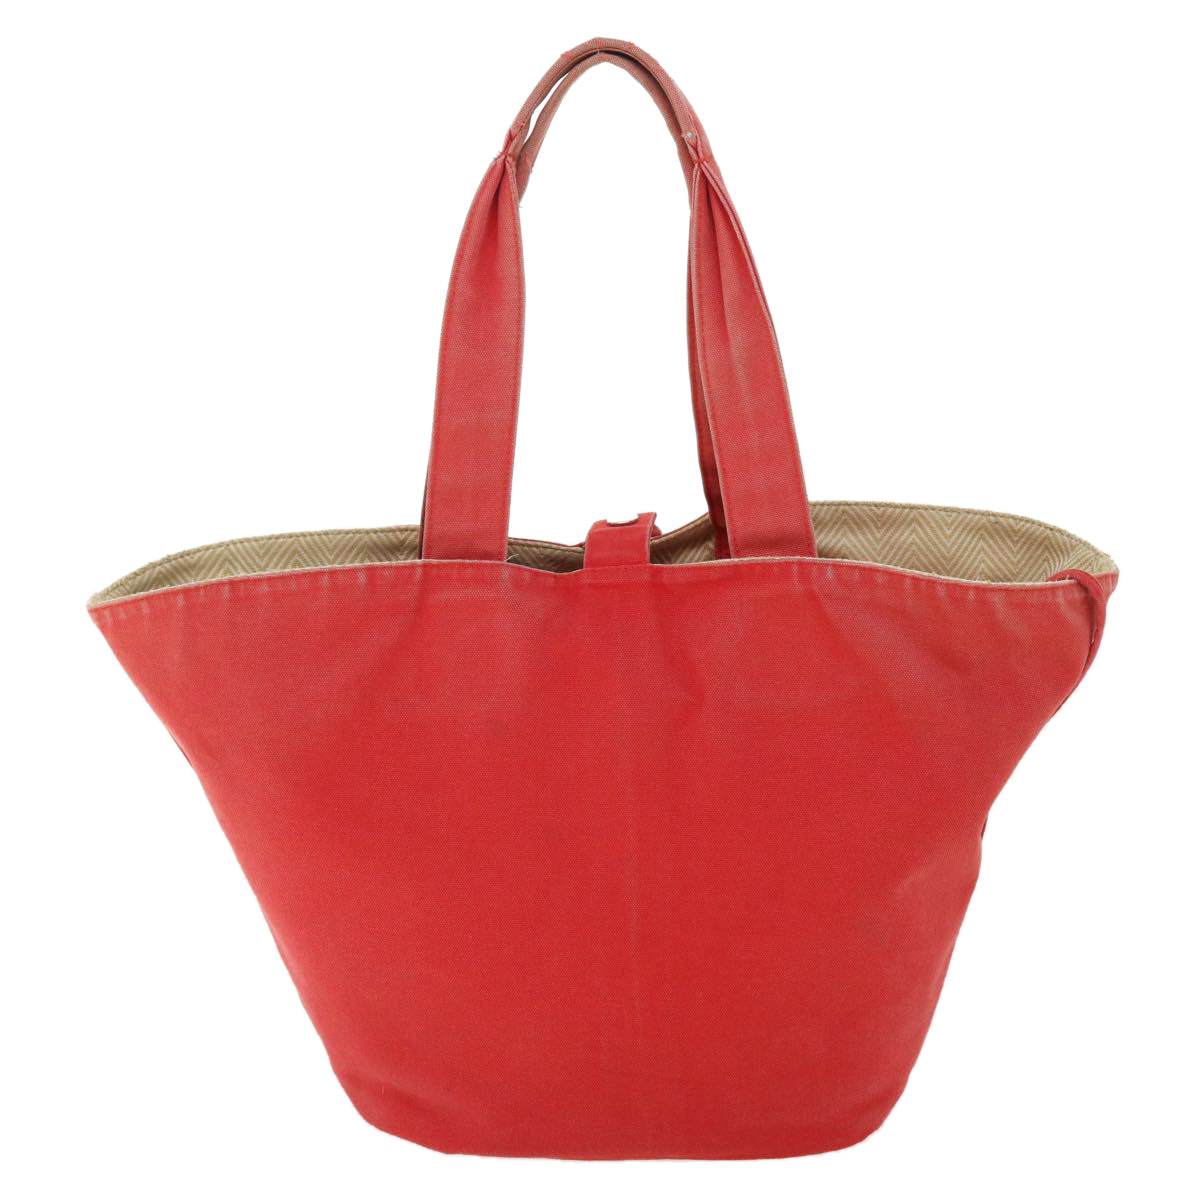 HERMES Panniedo Plage Tote Bag Canvas Red Auth bs7474 - 0